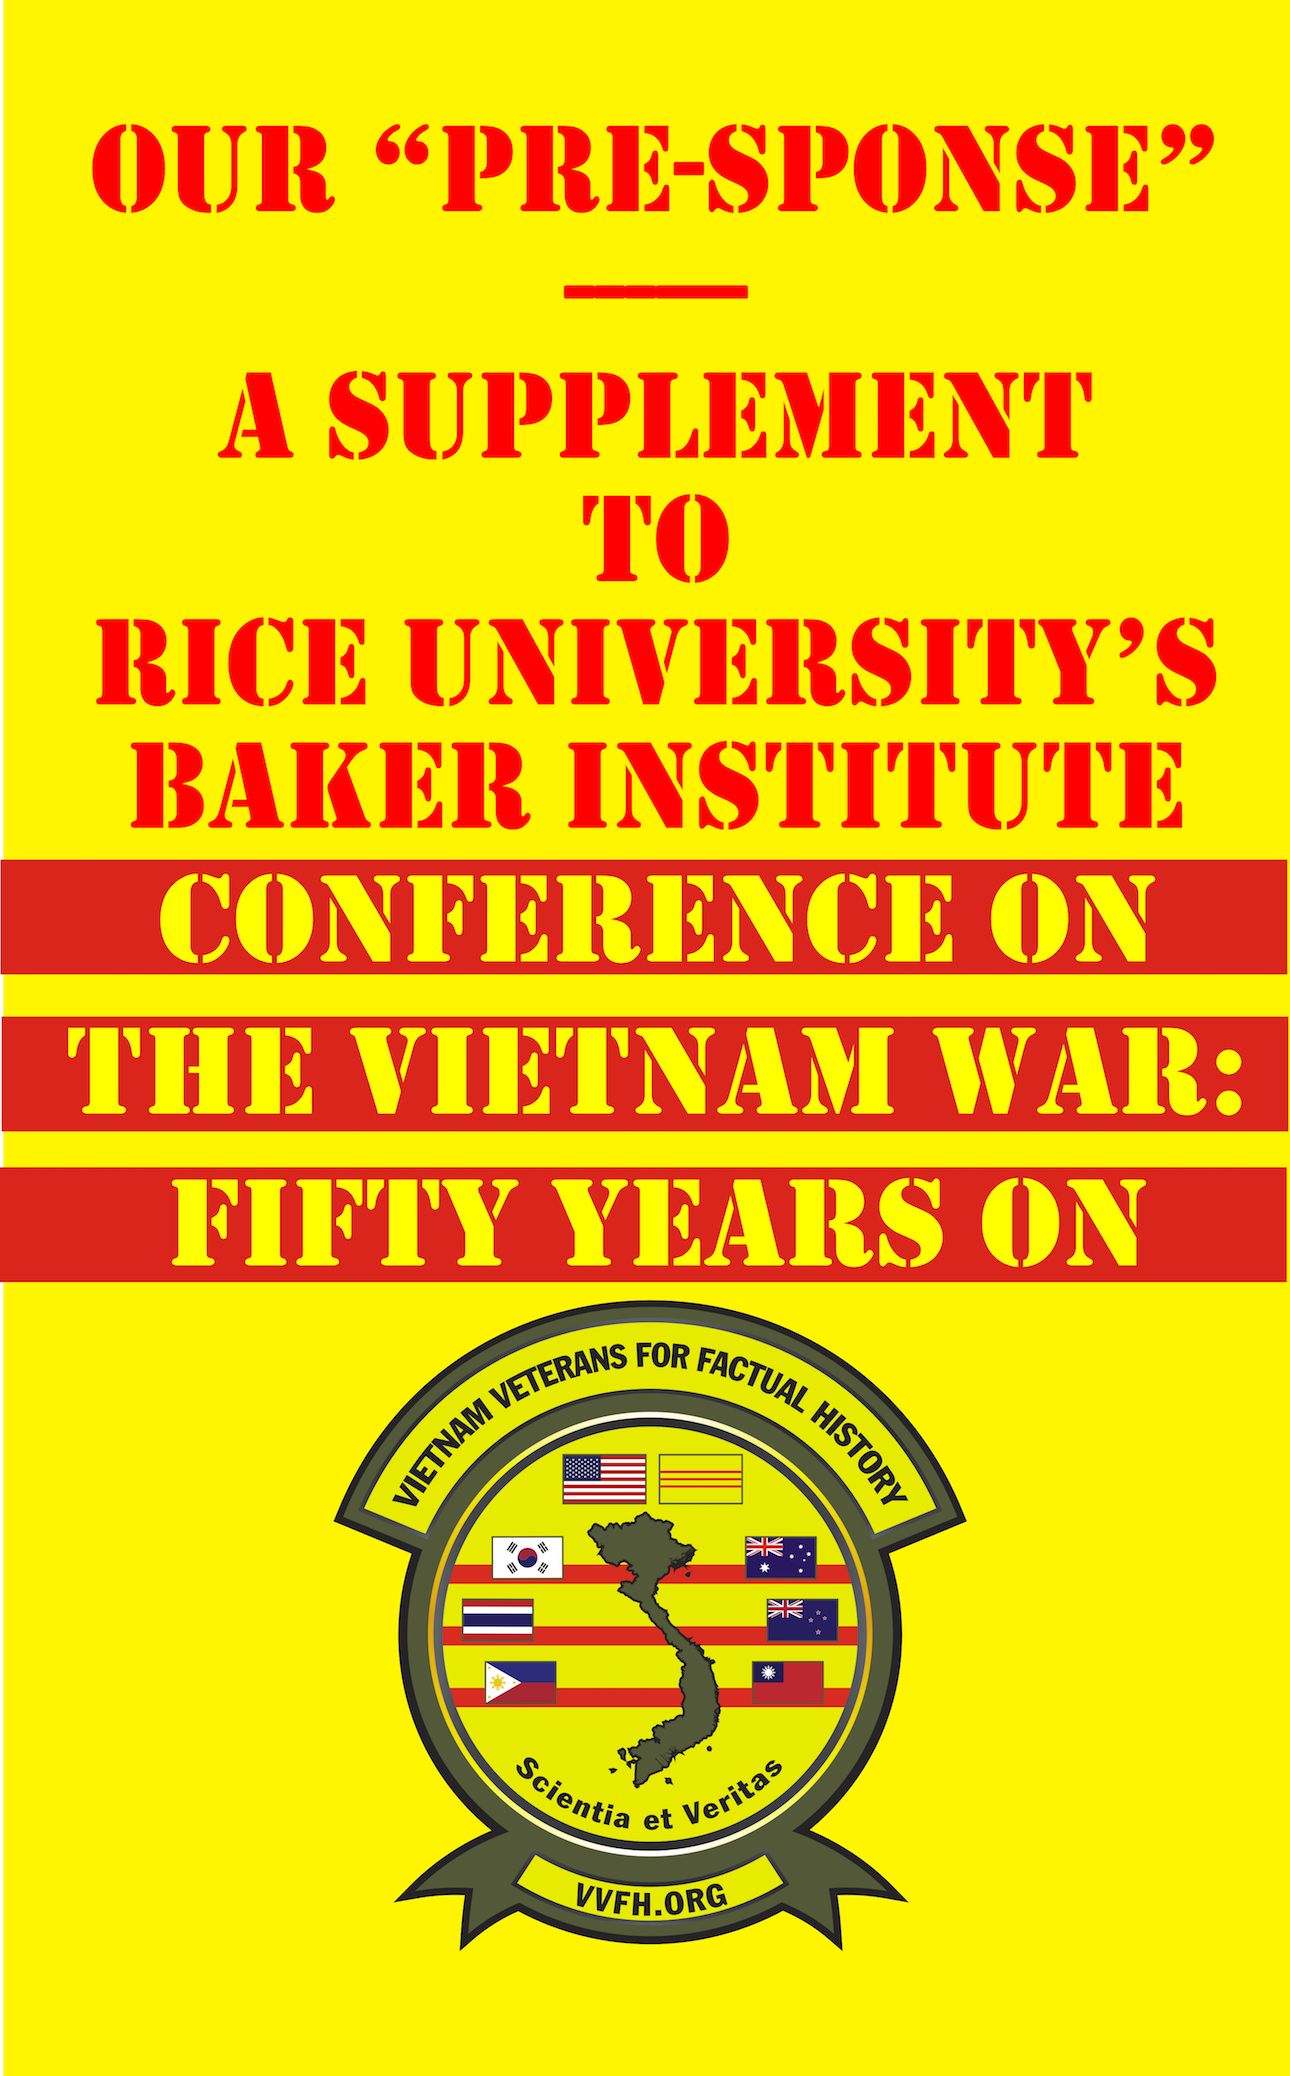 Conference on the Vietnam War Fifty Years On